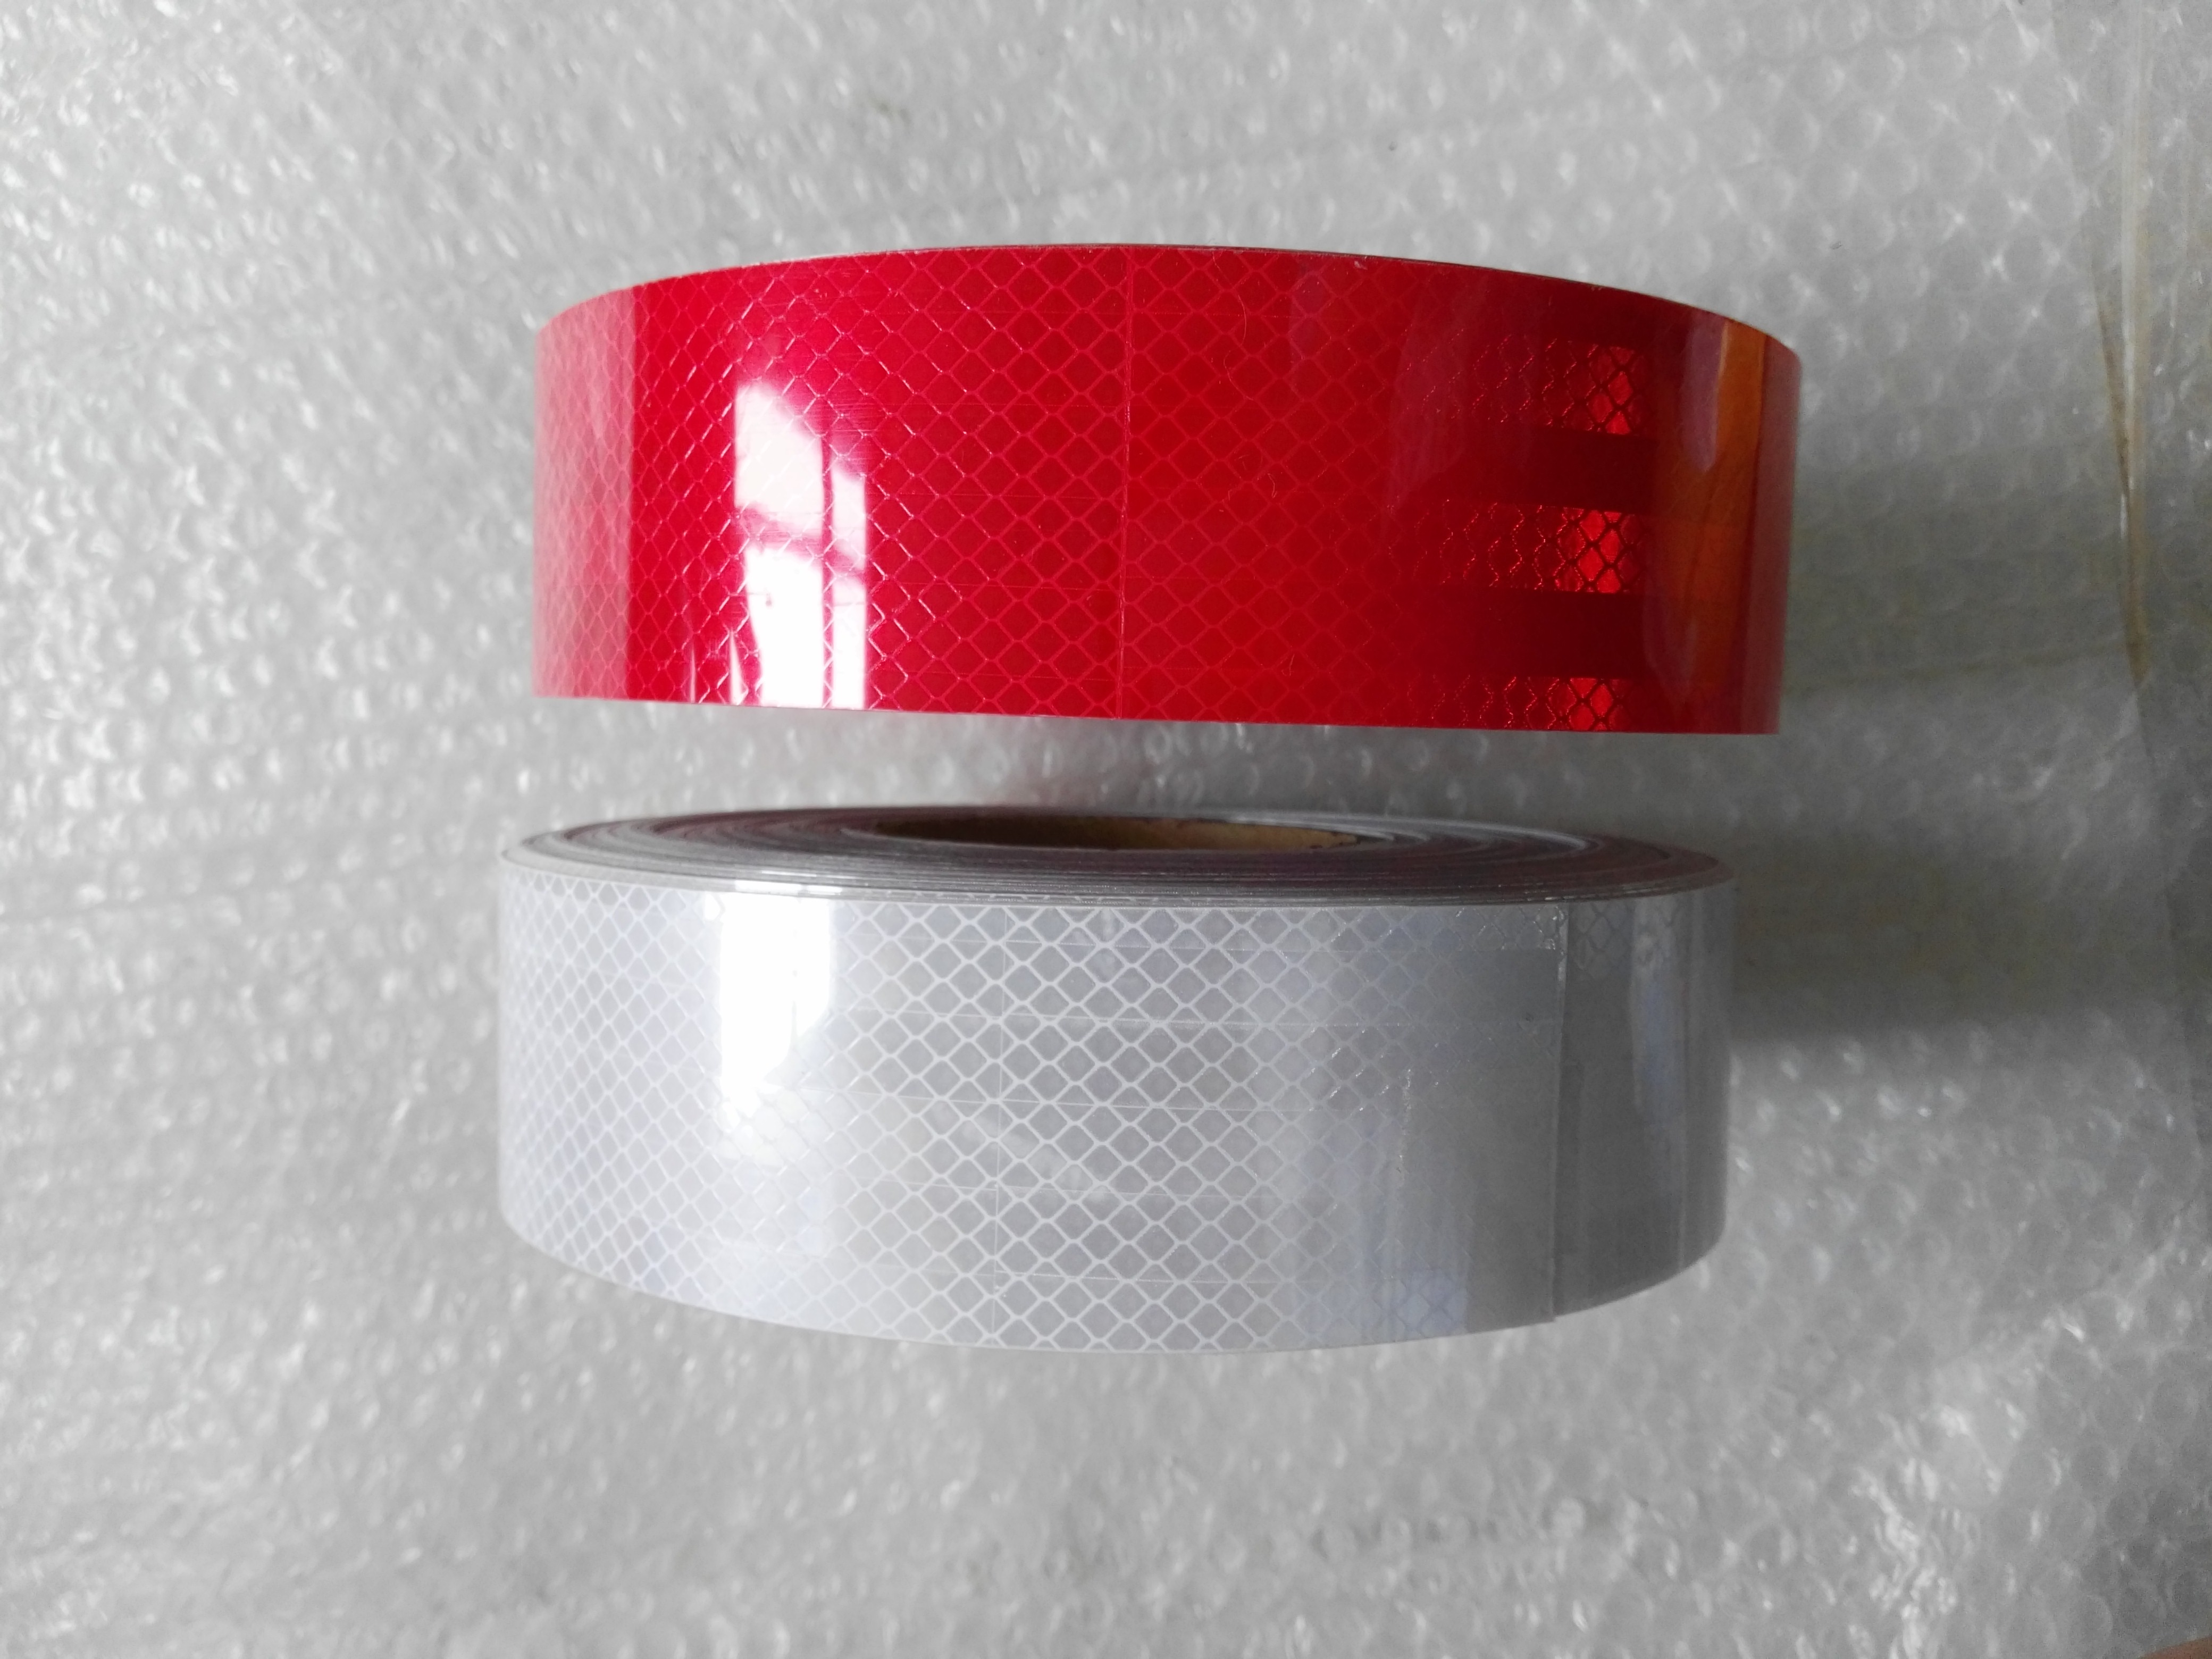 HC-O-3012 REFLECTIVE TAPE FOR BUS